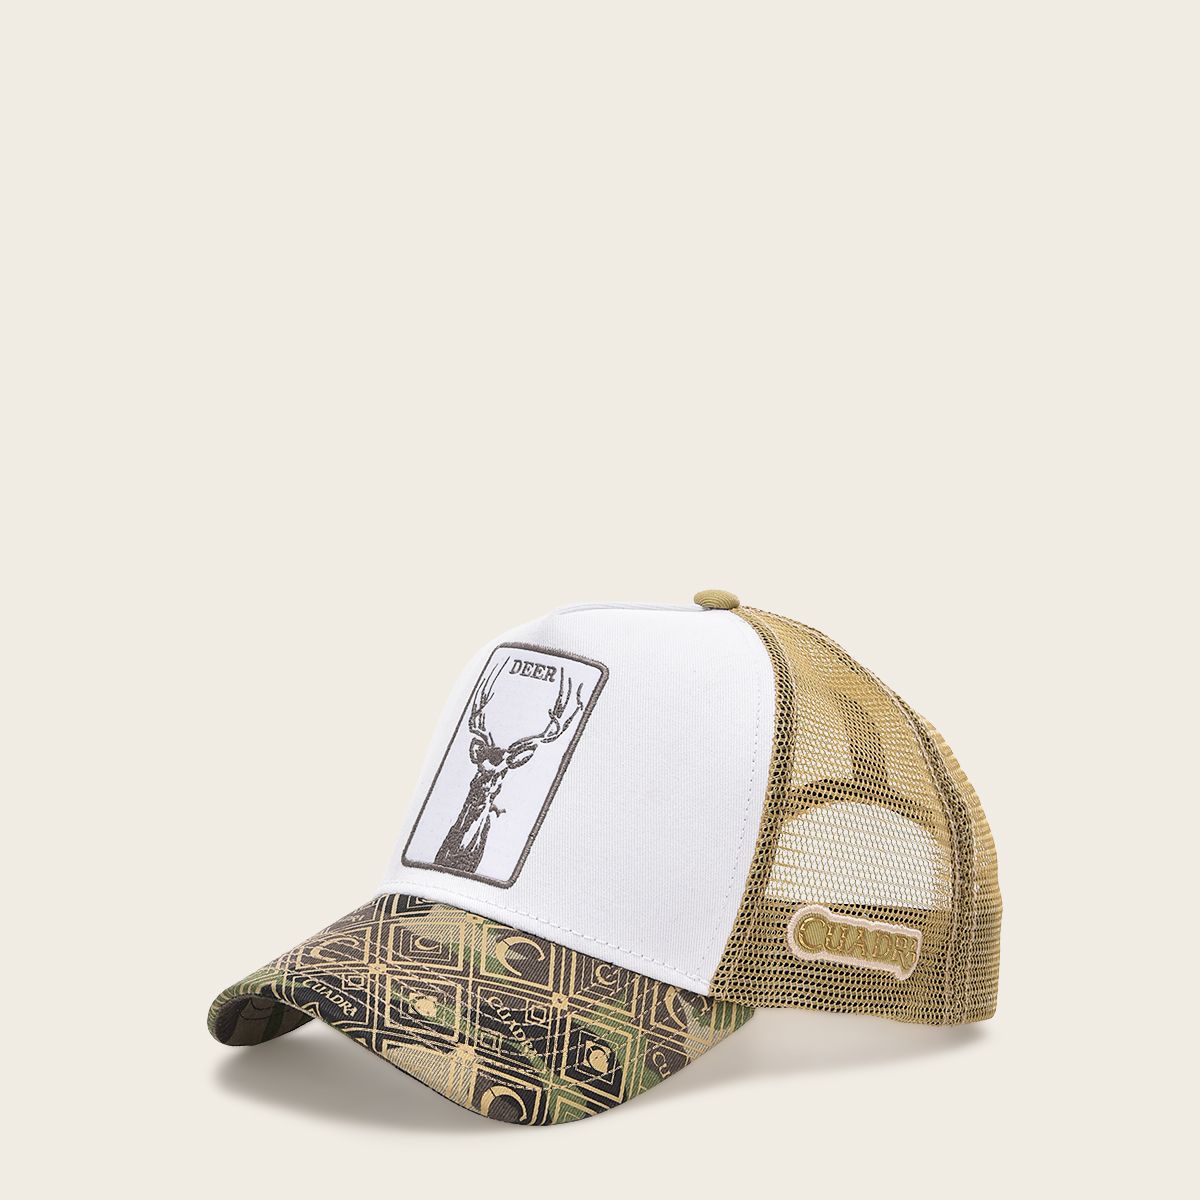 Cuadra camouflage cap with embroidery deer patch